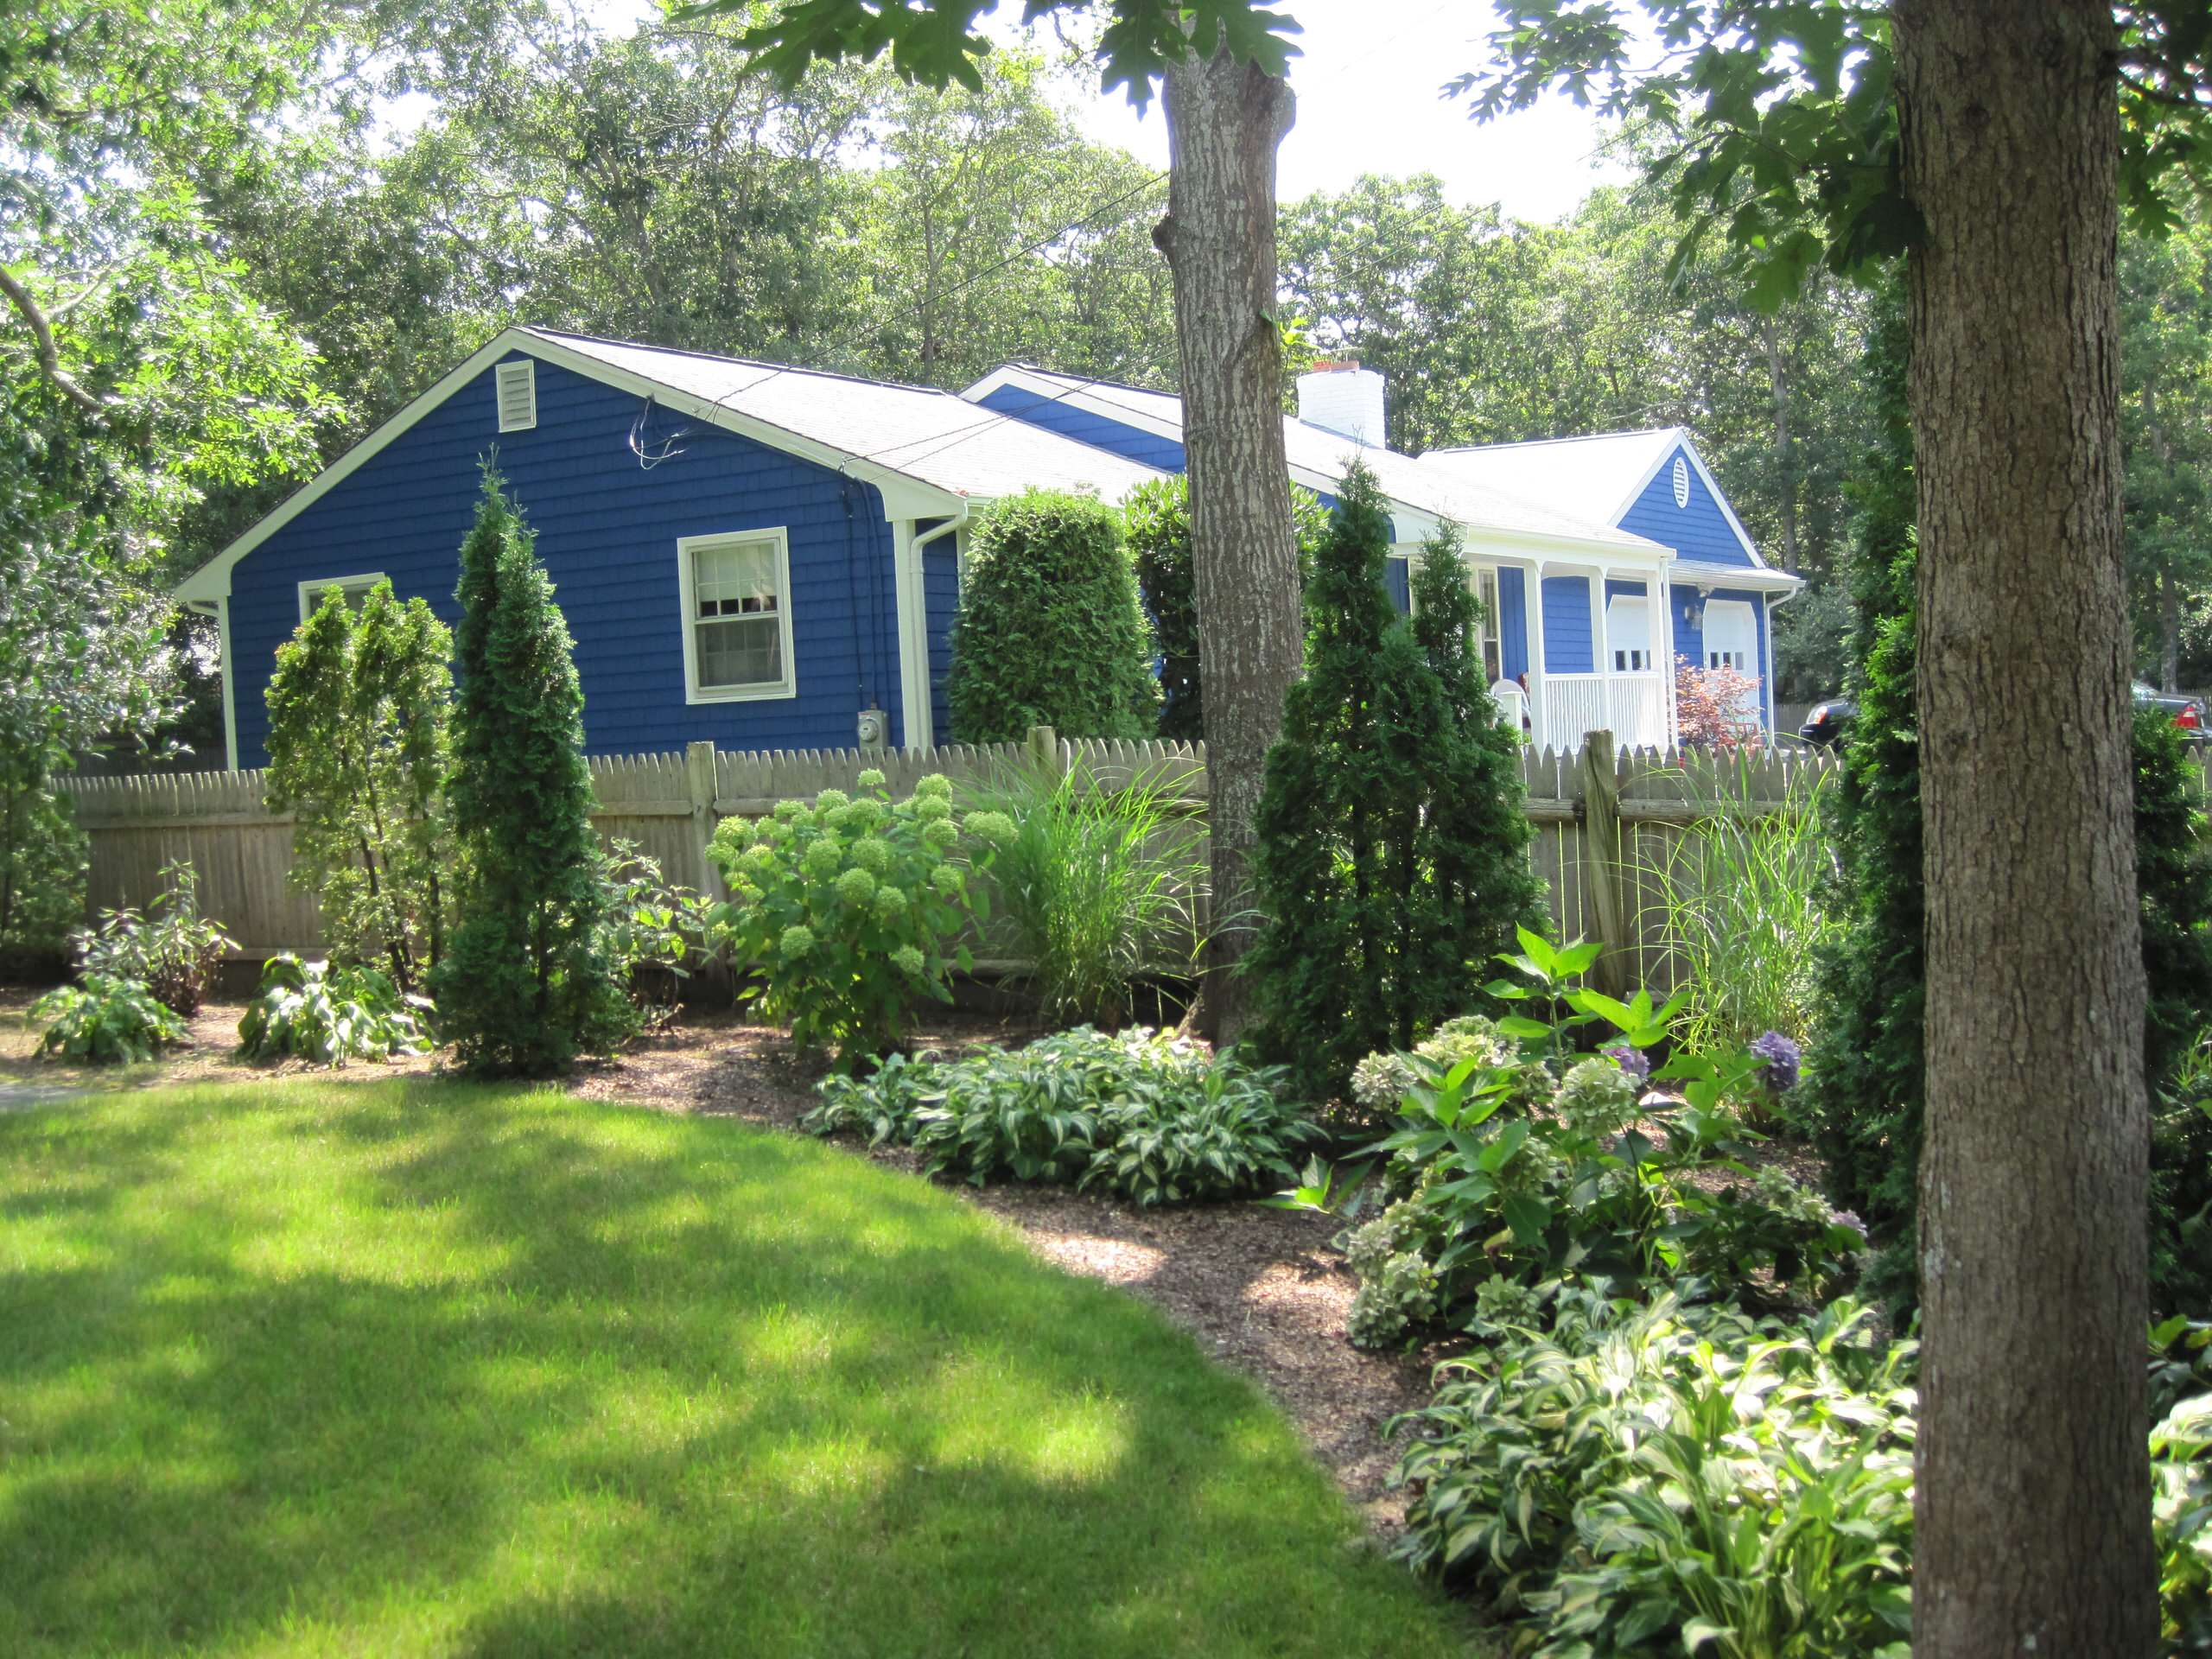 Cape Cod House Traditional, Cape Cod Landscaping Companies